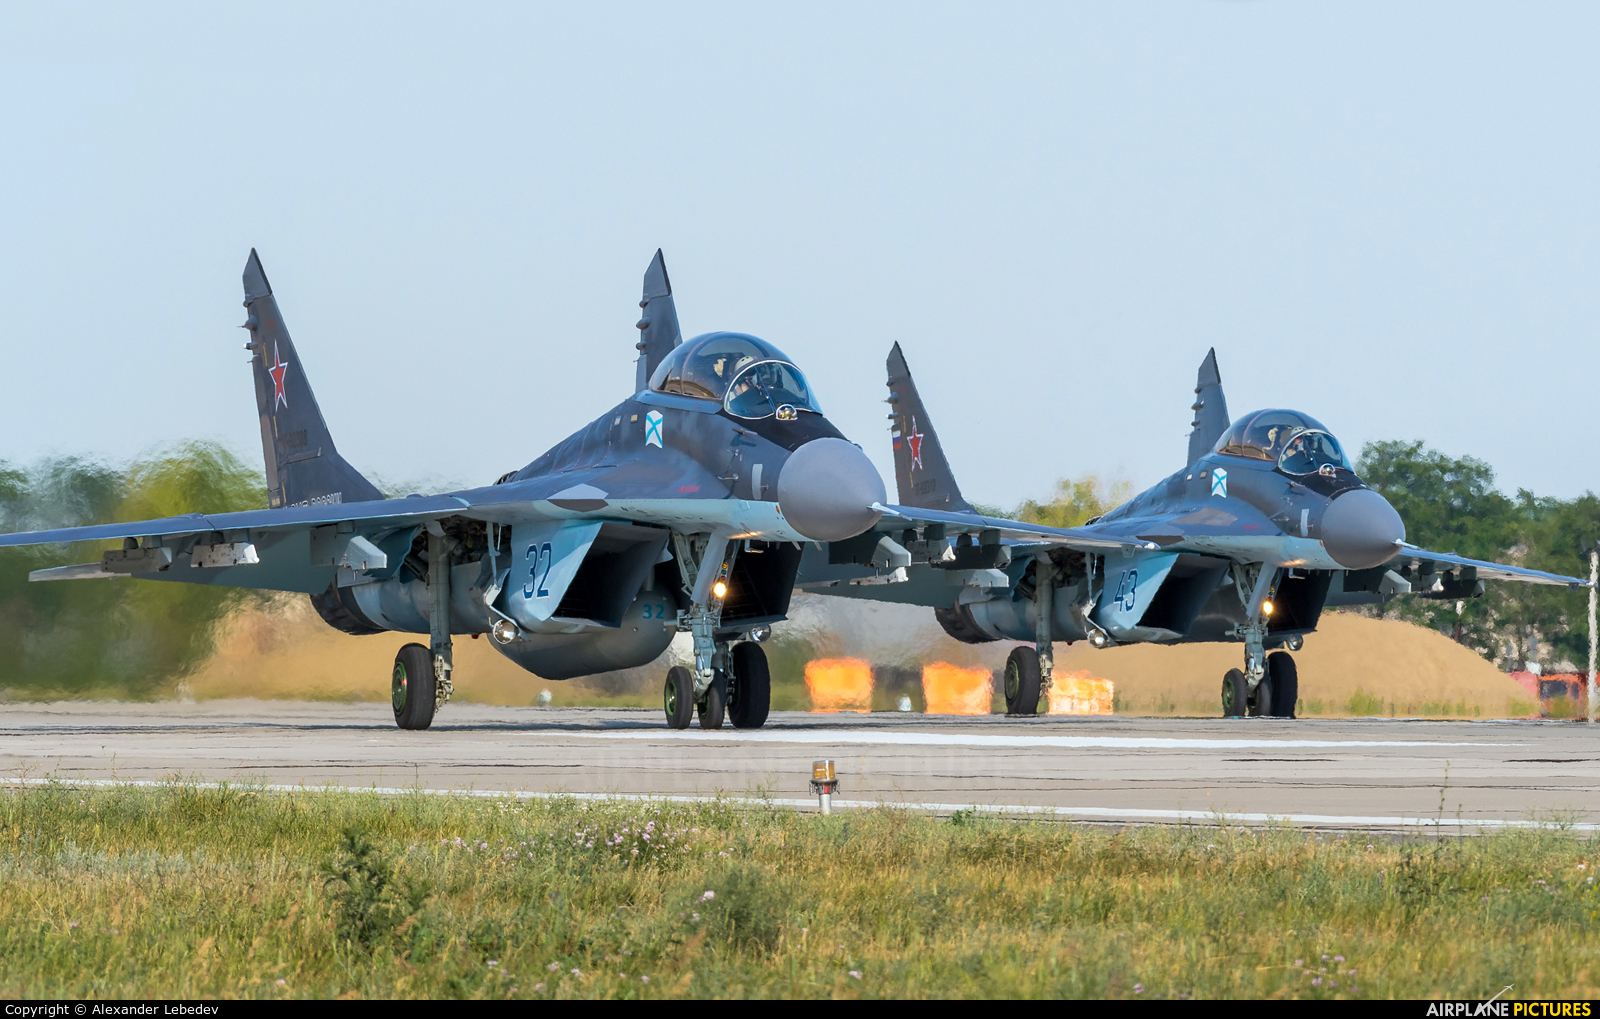 Russia - Navy 32 aircraft at Undisclosed location